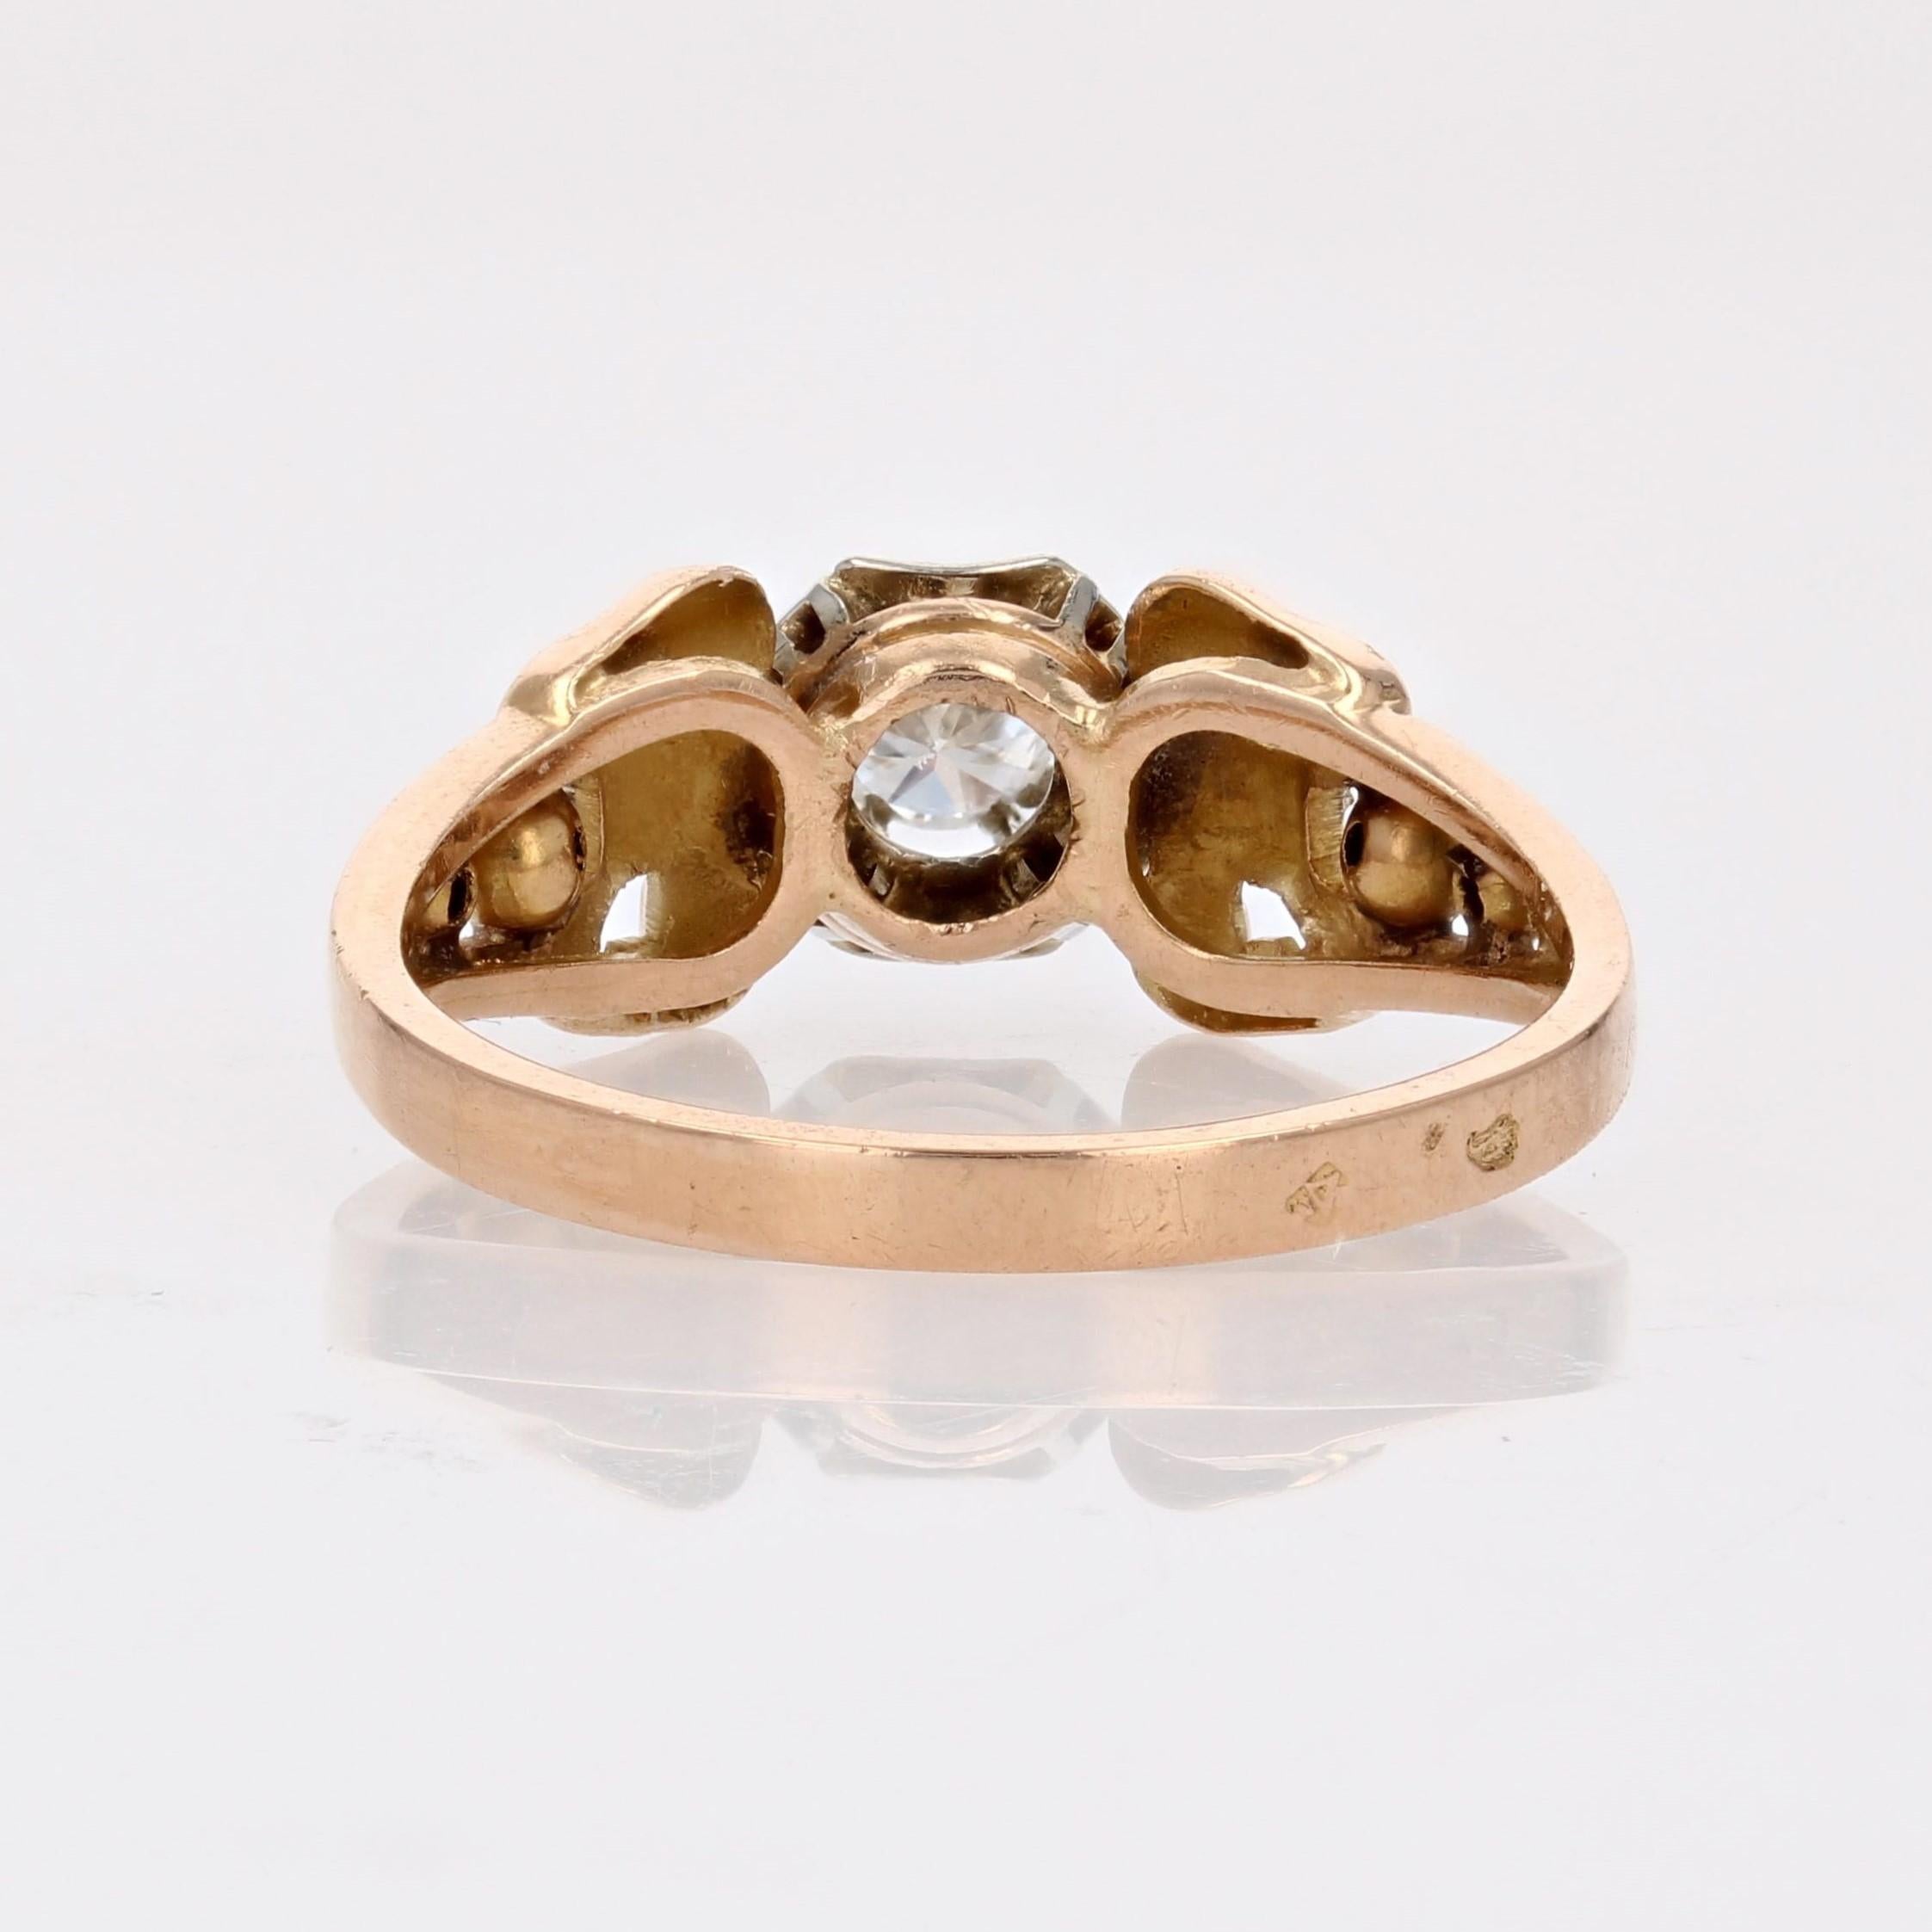 French 1950s Retro Diamond 18 Karat Yellow Gold Solitaire Ring For Sale 5